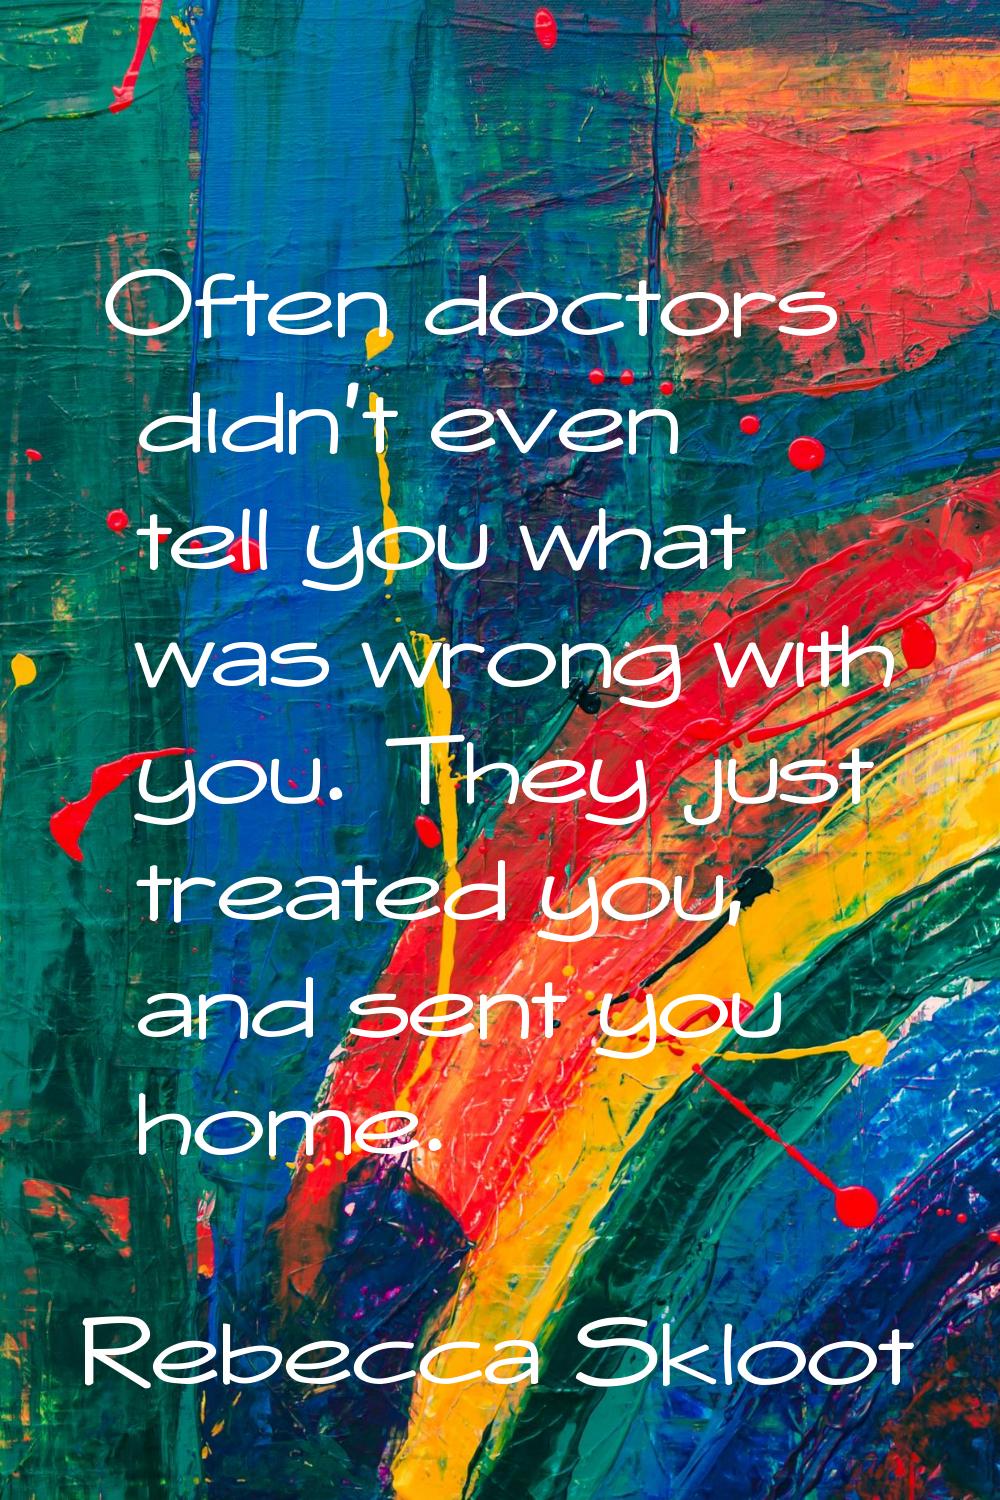 Often doctors didn't even tell you what was wrong with you. They just treated you, and sent you hom